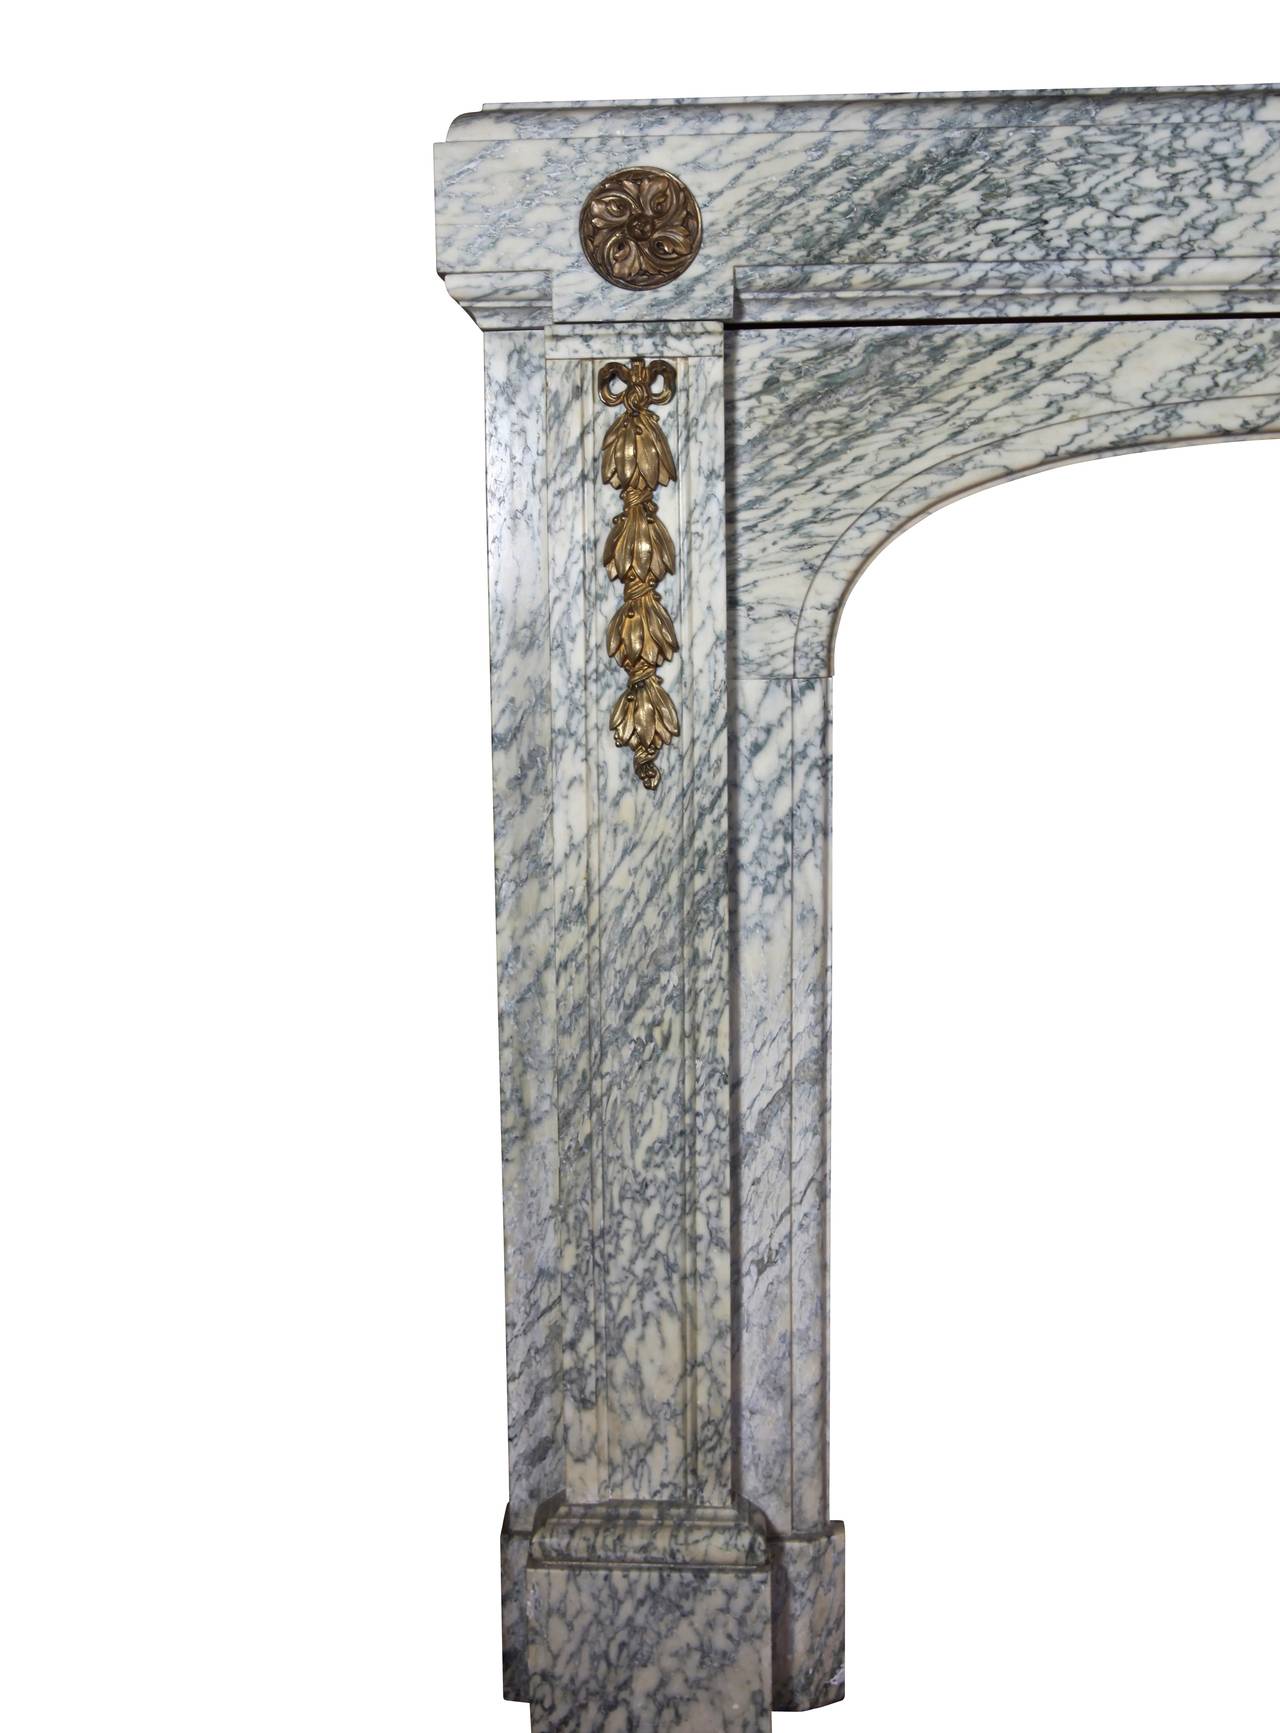 The combination of the 20th century Campan vert marble with brass and the craftsmanship is an example of the Belgian arts and the industry. This mantel (fireplace) was installed in an Art Deco house in Brussels. The veining of the marble was